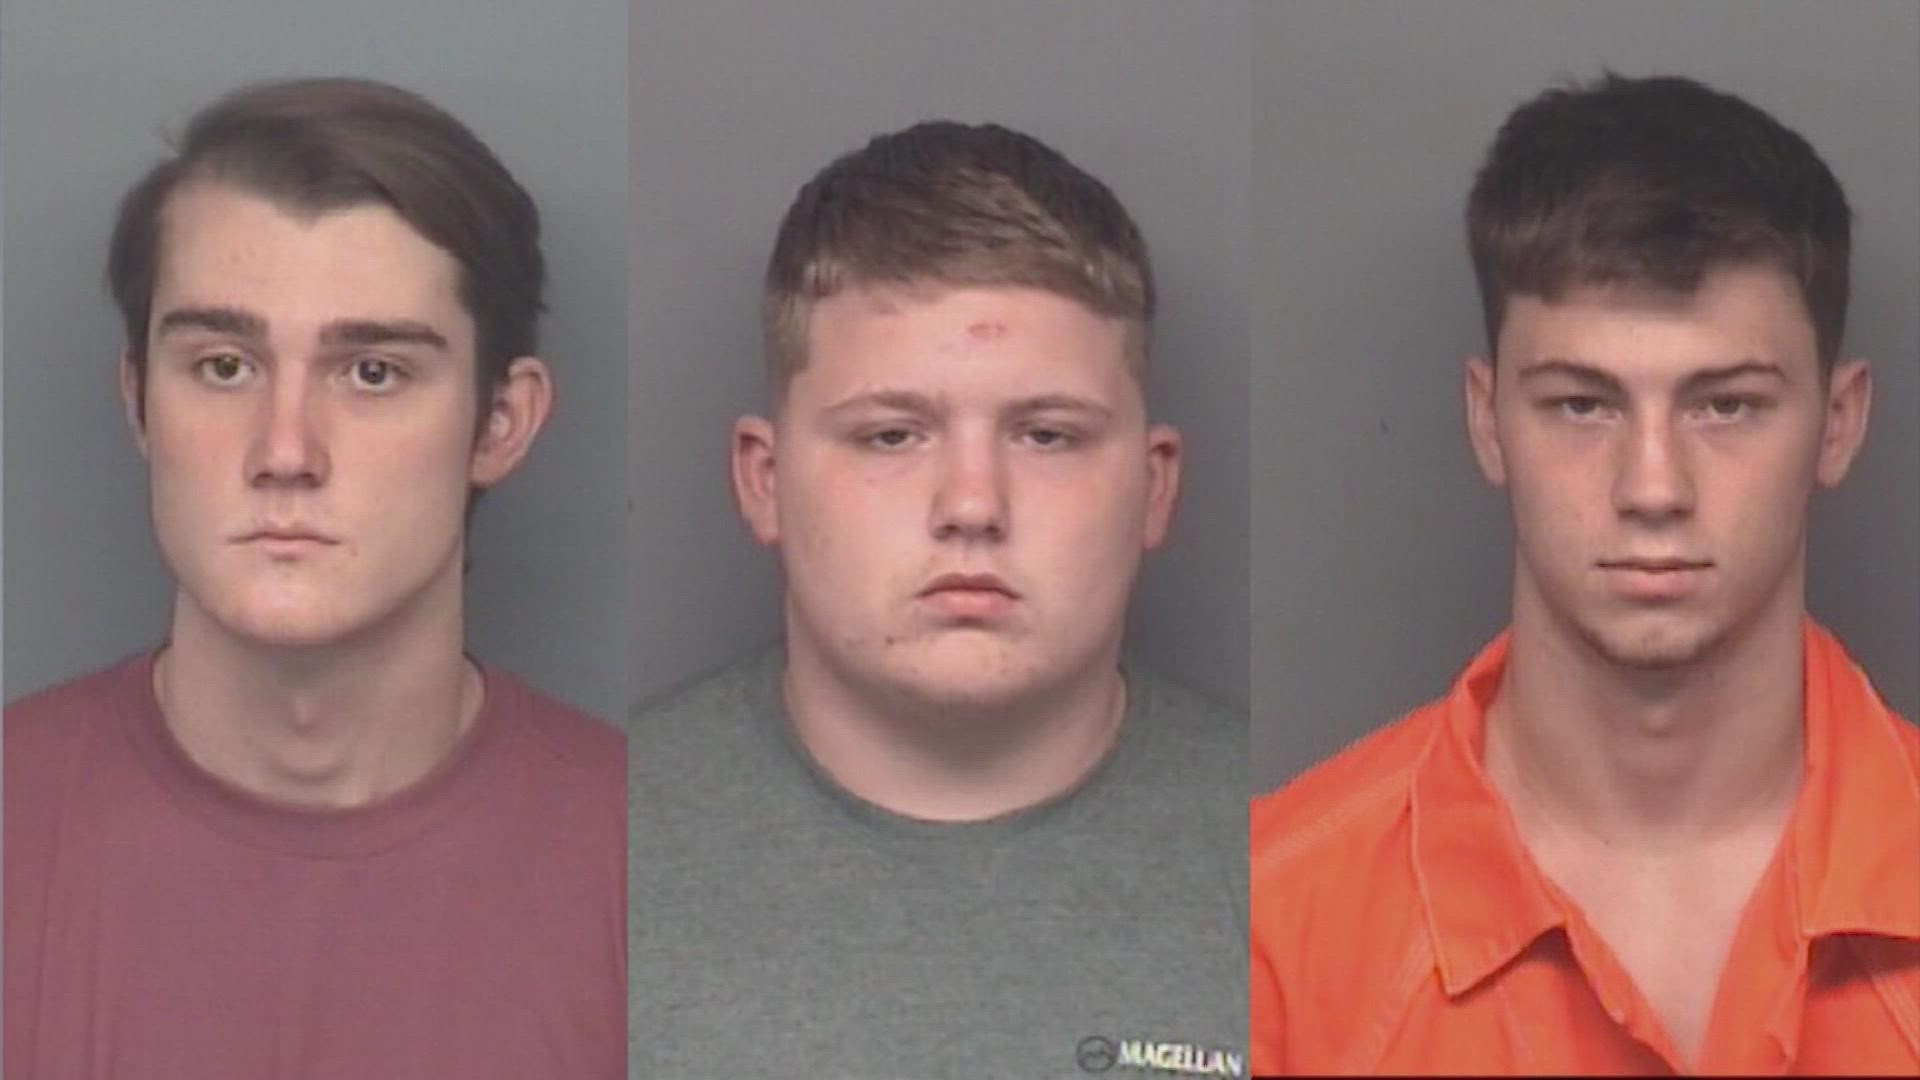 Three Texas Teens Indicted by Grand Jury for Brutally Beating High School Classmate